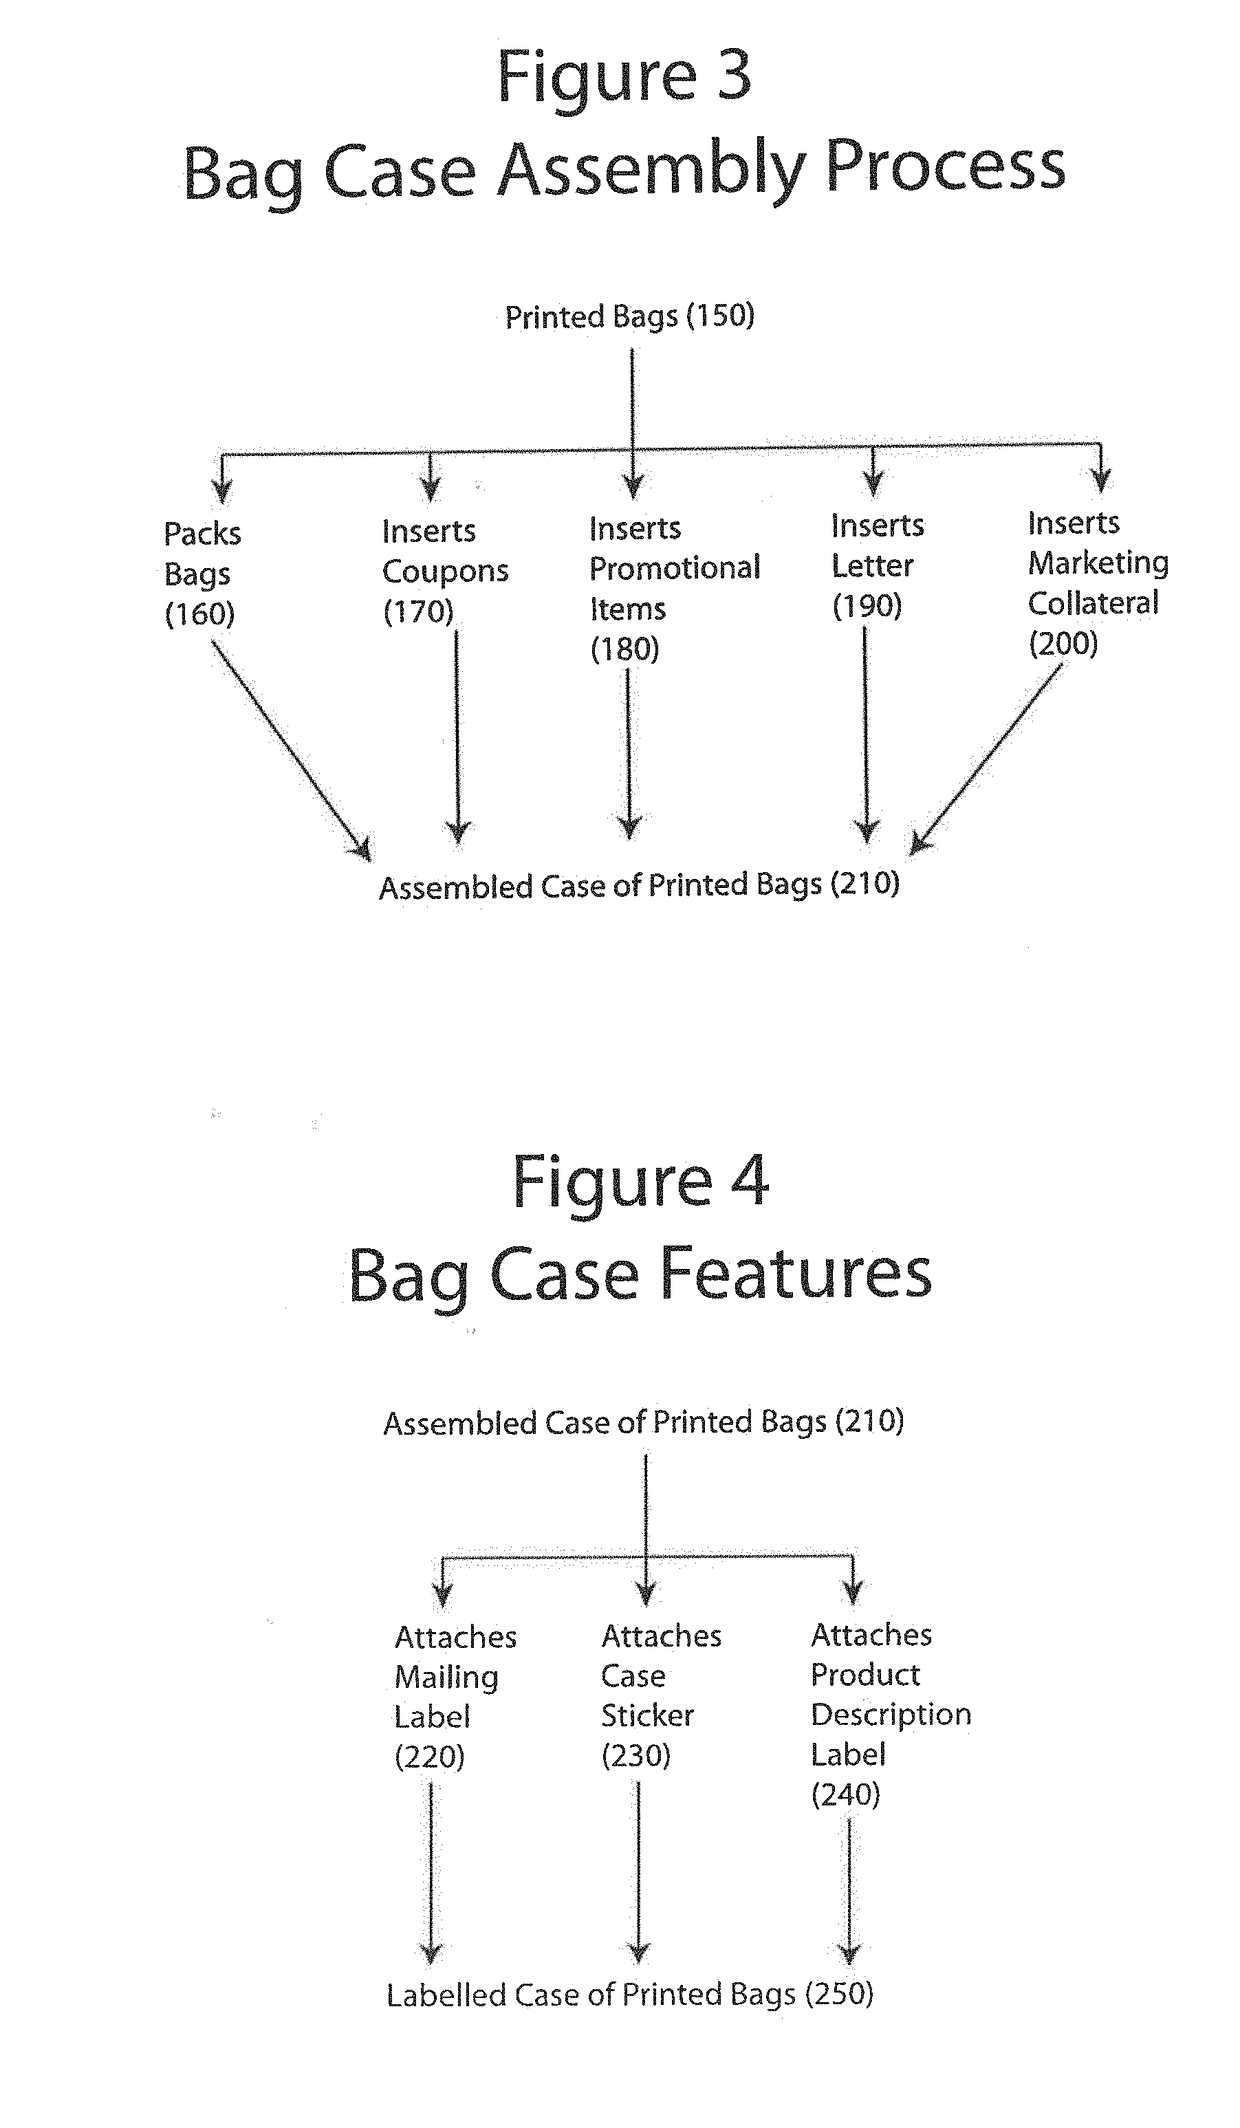 System and method for distributing bags and other packaging and analyzing sales of items promoted on these items